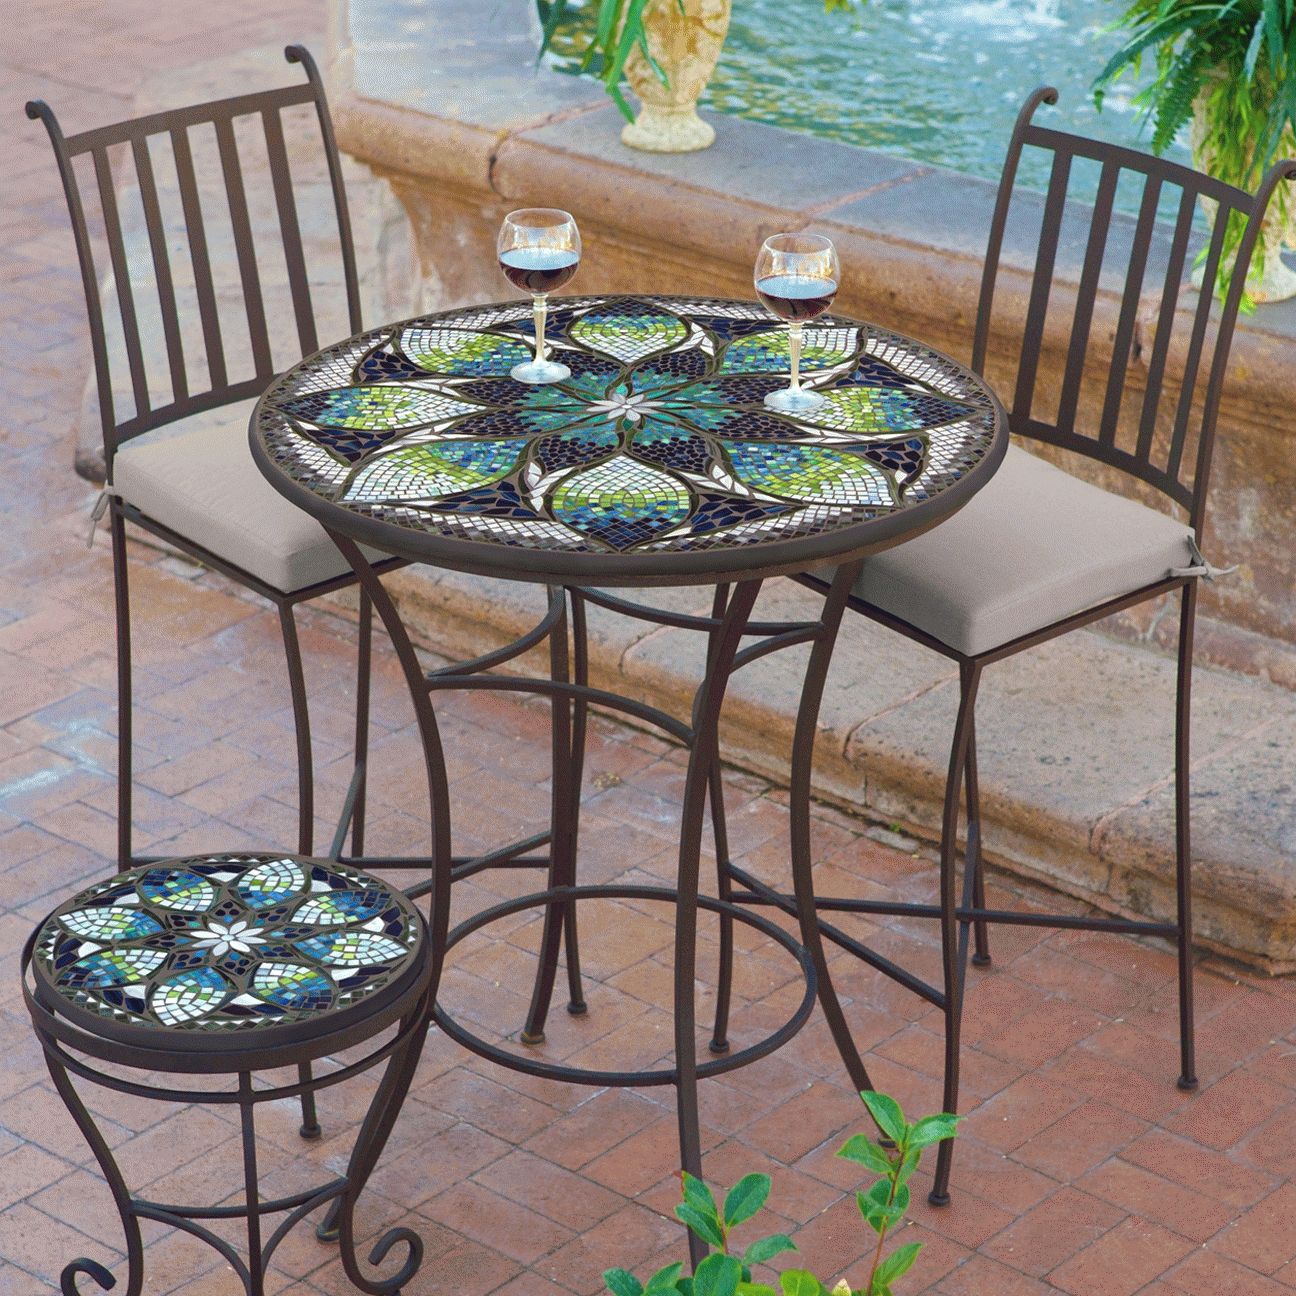 Most Popular Mosaic Dining Tables For Sale Inside Neille Olson – Knf Designs (Photo 8 of 25)